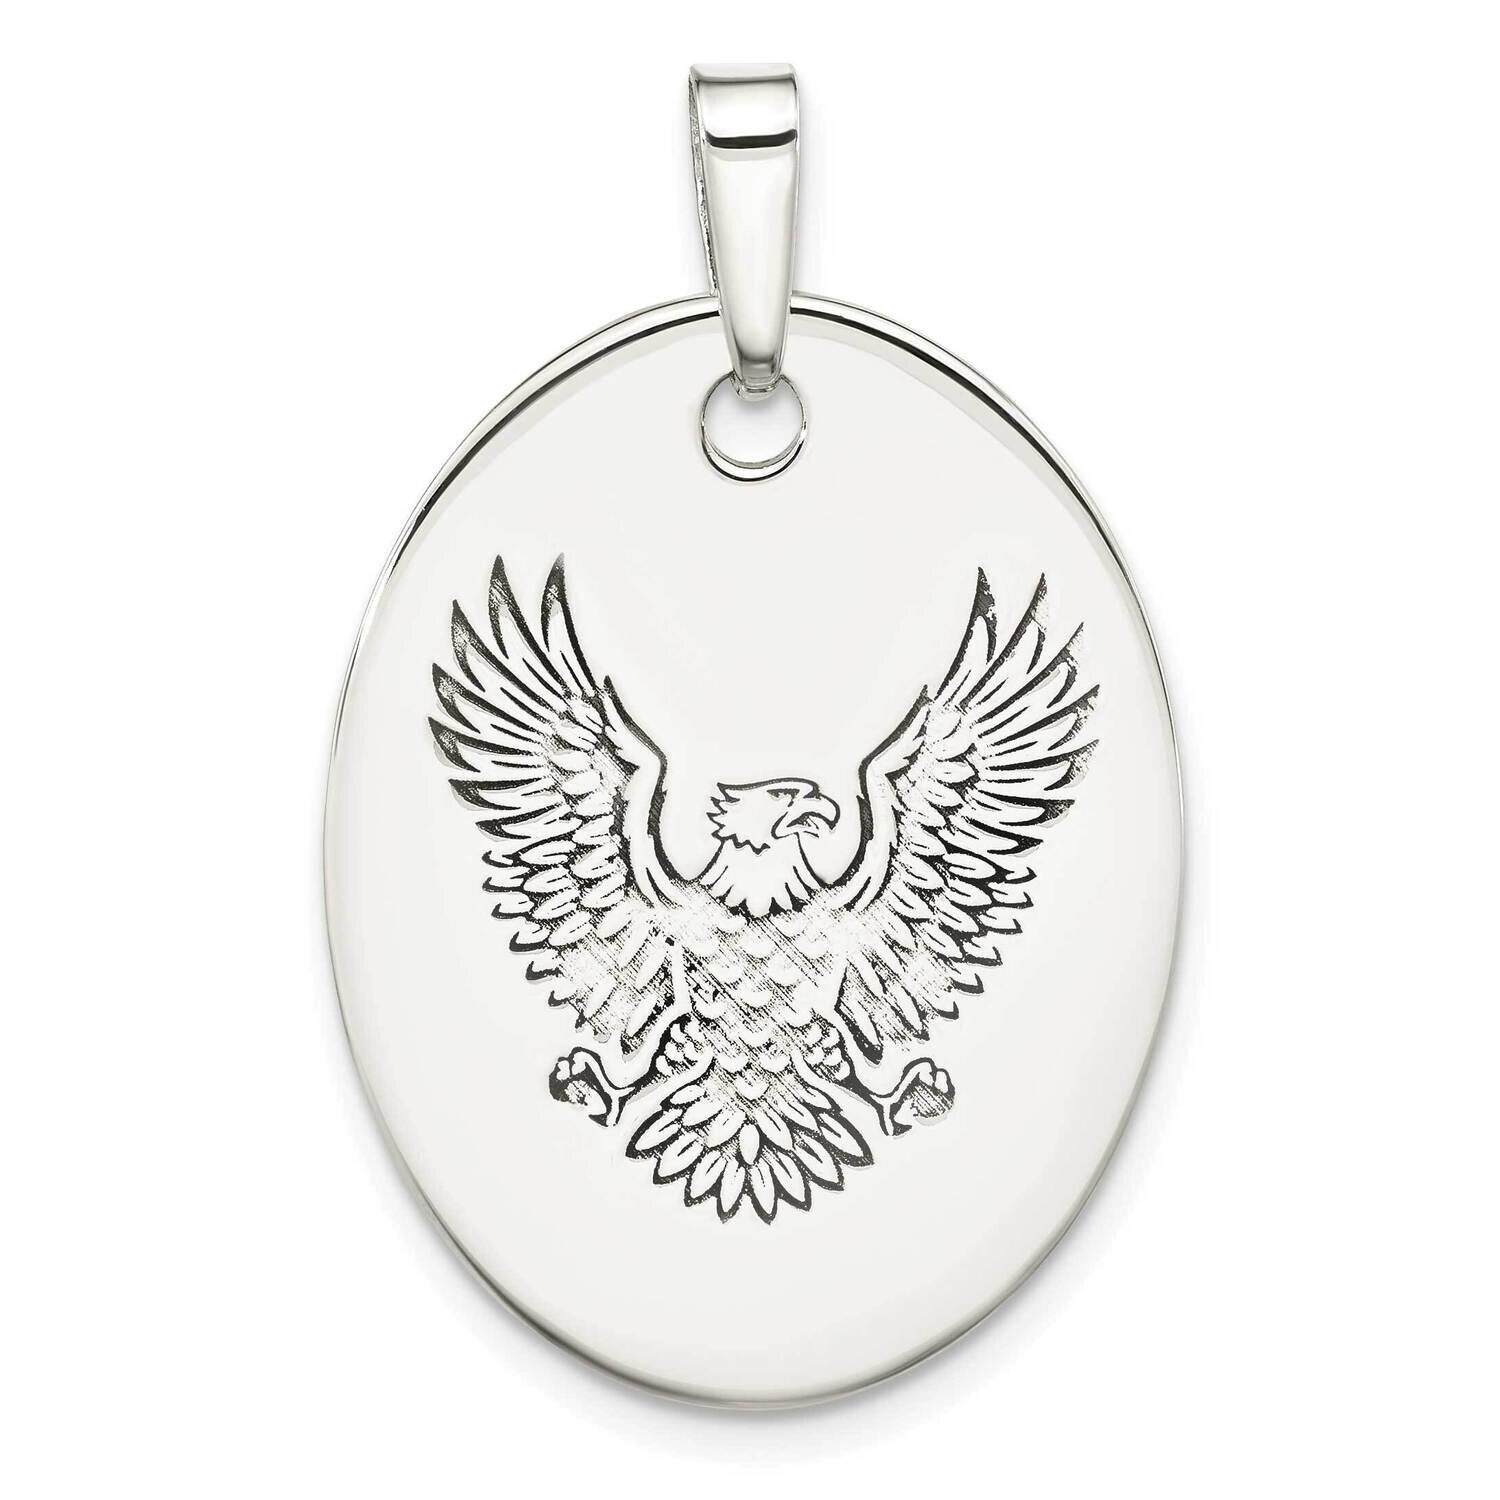 Eagle Oval Pendant Sterling Silver Polished QC11056